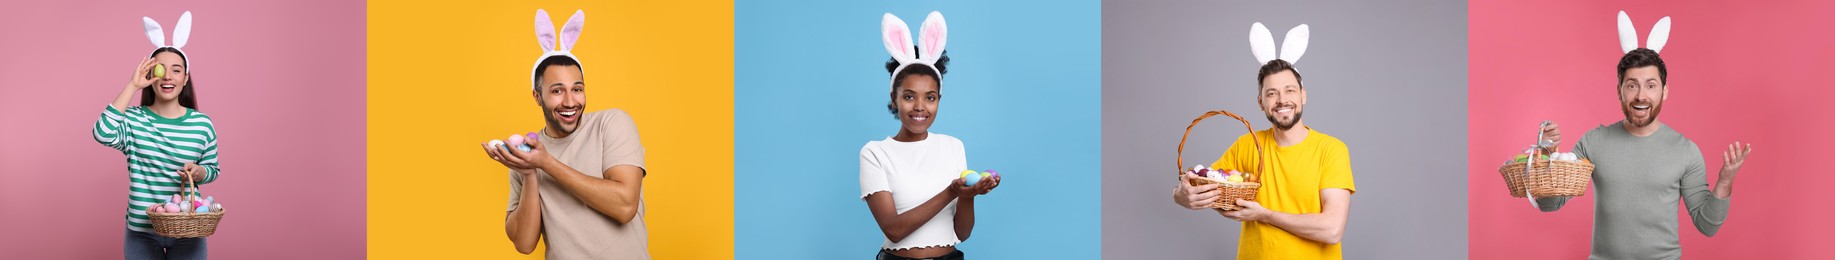 Image of Photos of people with Easter eggs and bunny ears headbands on different color backgrounds. Collage design